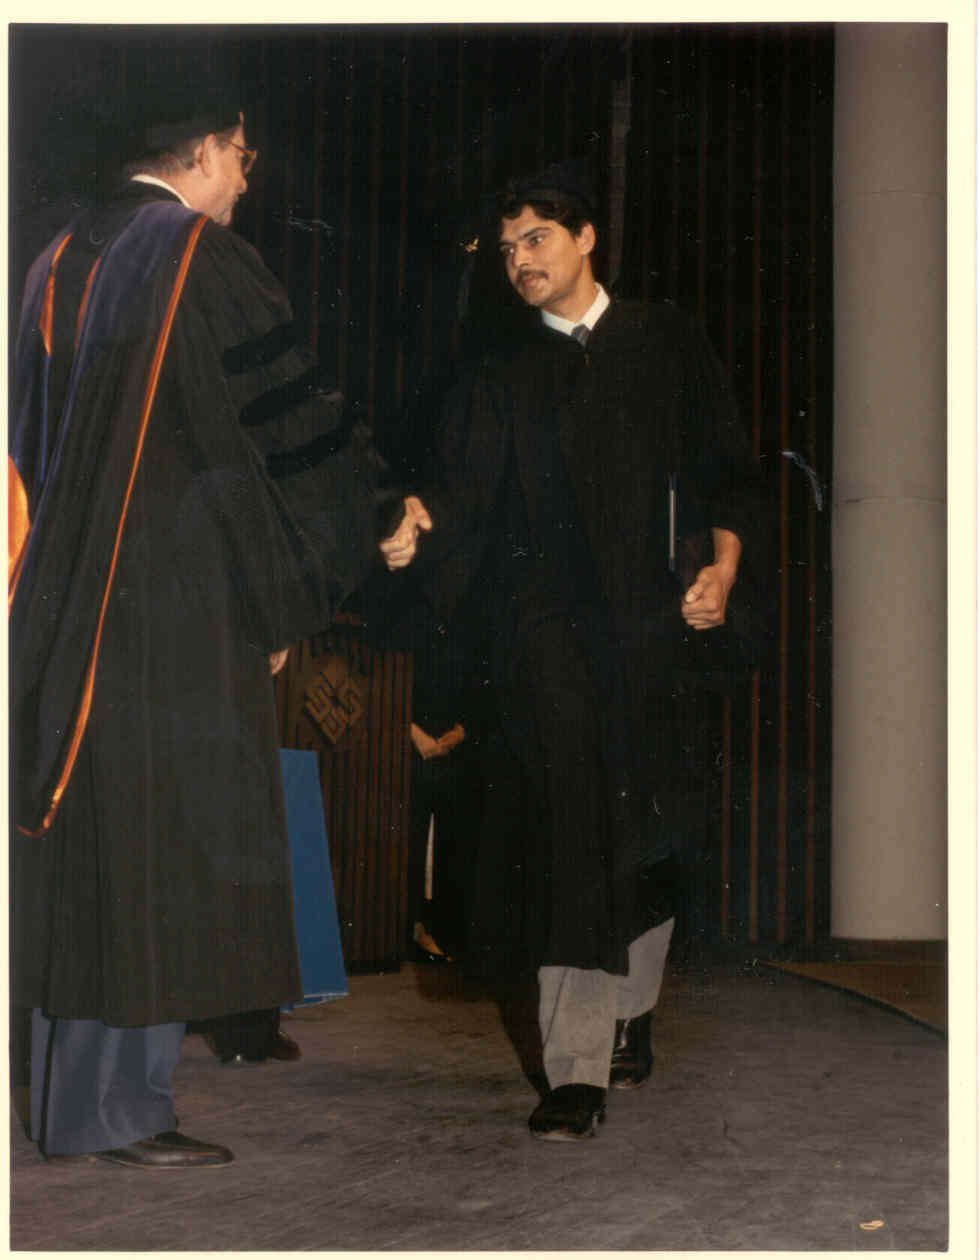  Myself at 29 yrs - during graduation ceremony in 1987, when I received my Ist Bachelors degree in Computer Science 